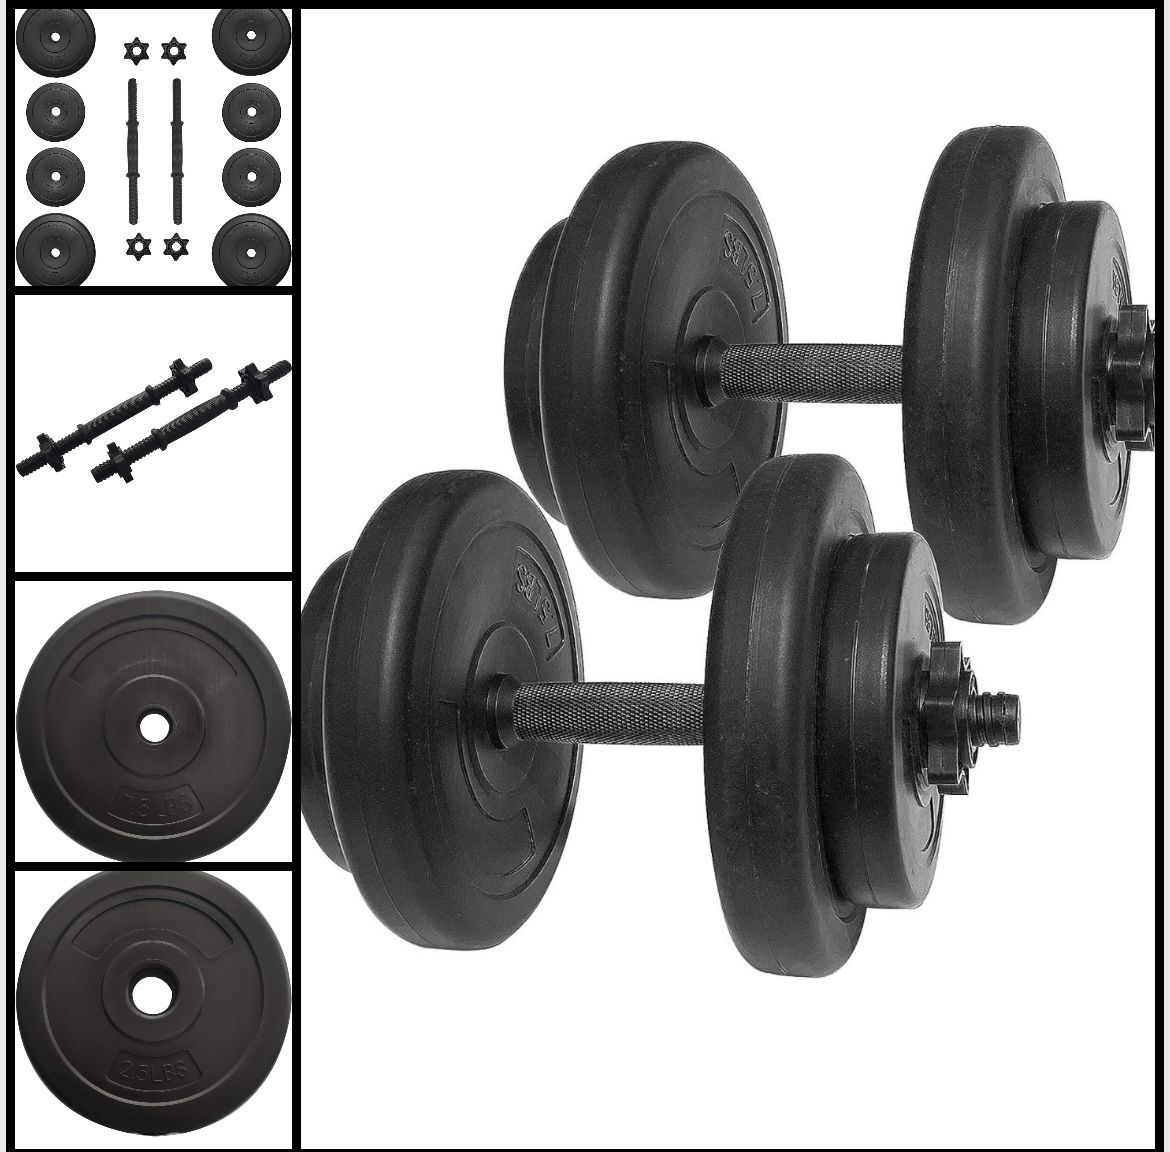 2- 20lb Dumbbells (40lbs Of Weights) New